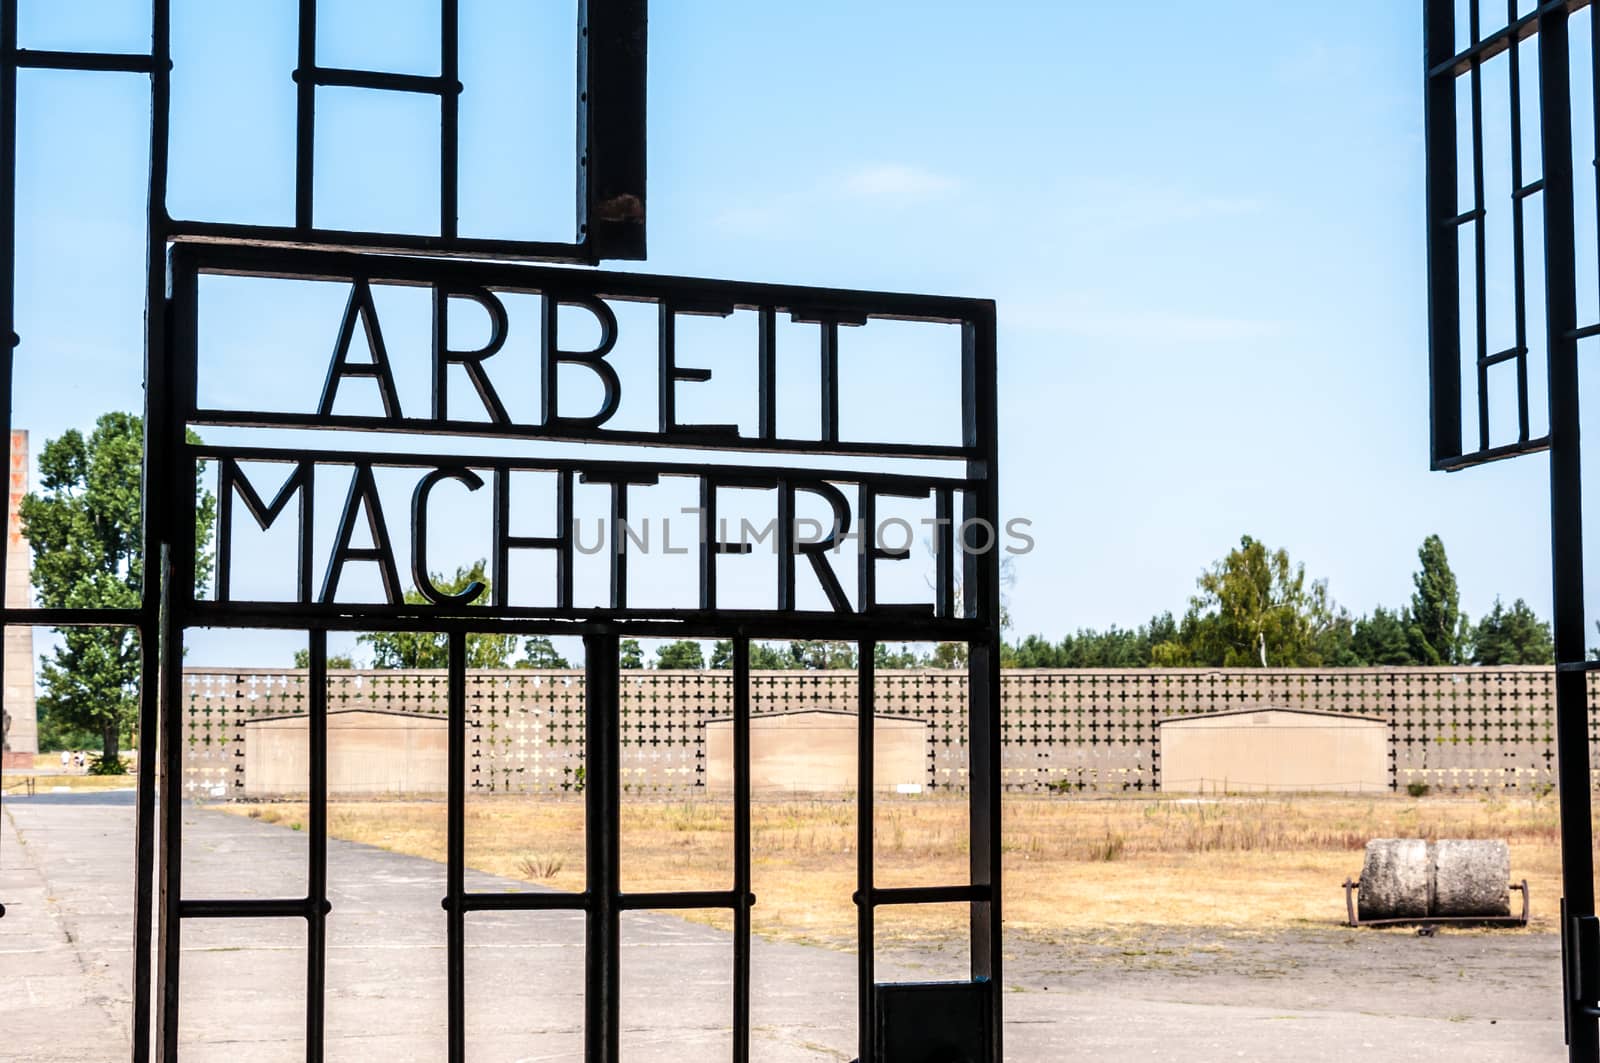 part of the former concentration camp Sachsenhausen near Berlin